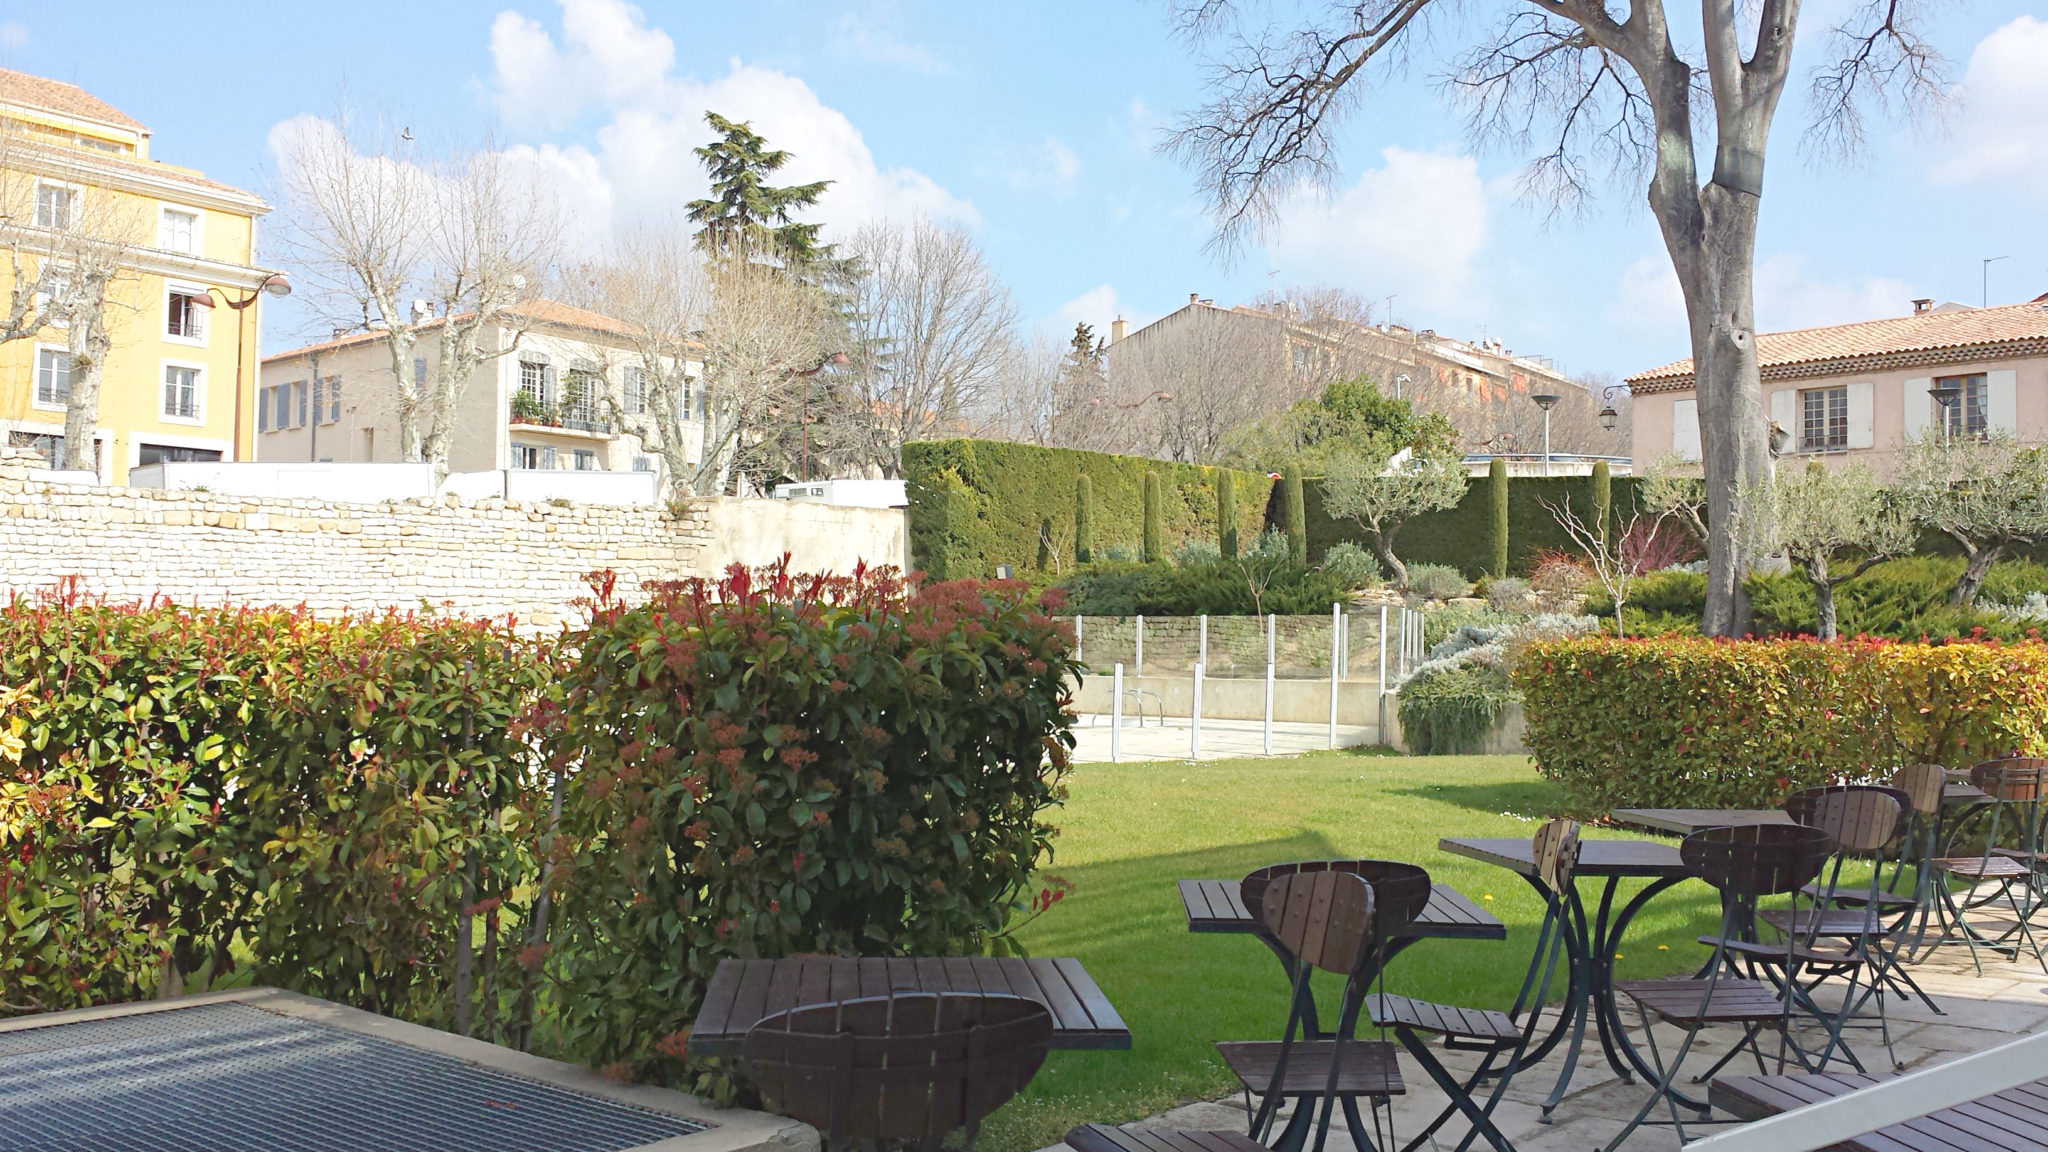 Journee_cocooning_aixenprovence_spa_thermes_sextius_terrasse_orangerie